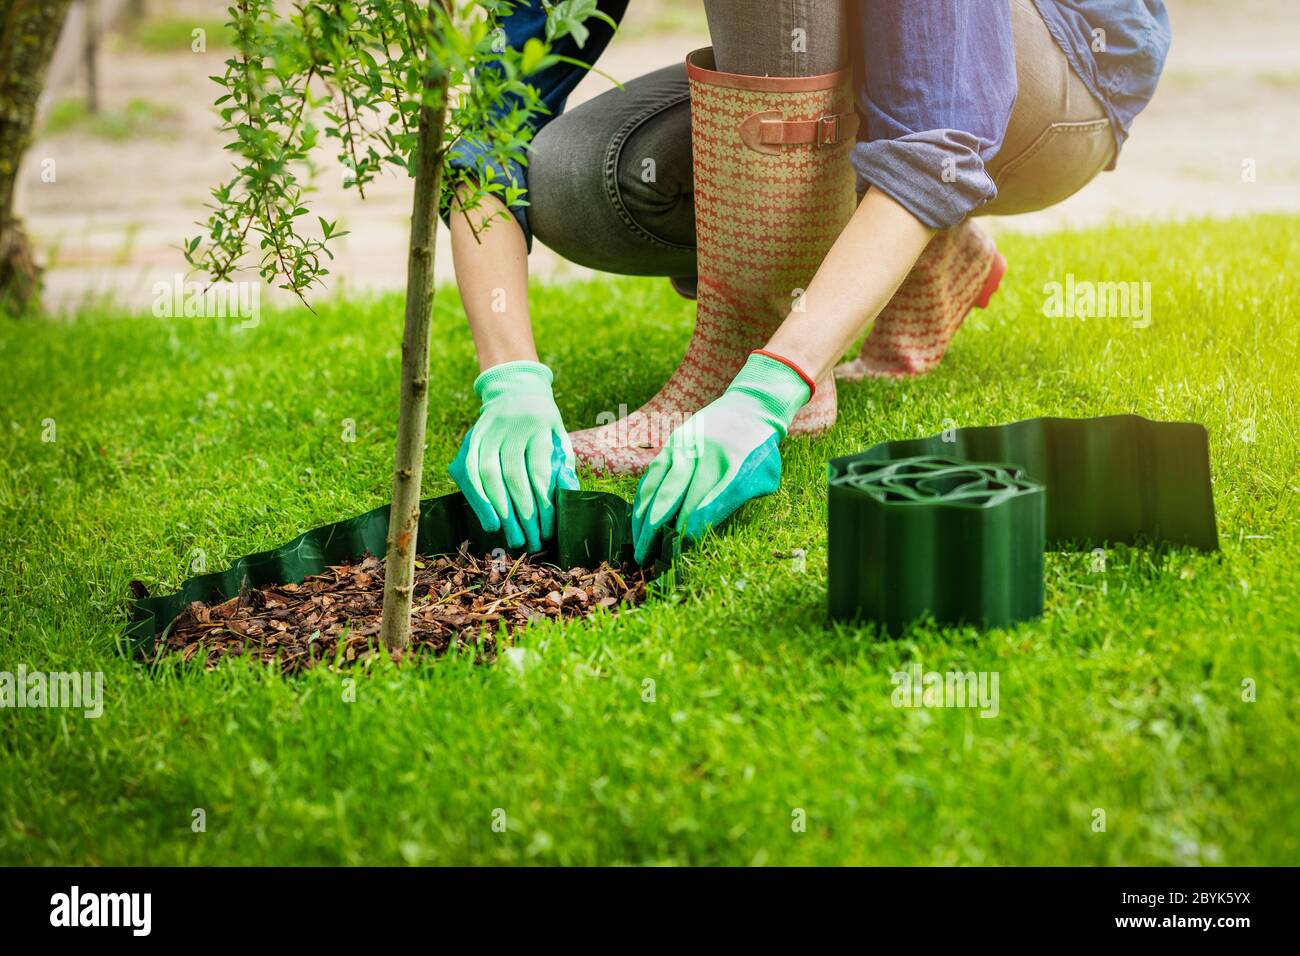 woman install plastic lawn edging around the tree in garden Stock Photo